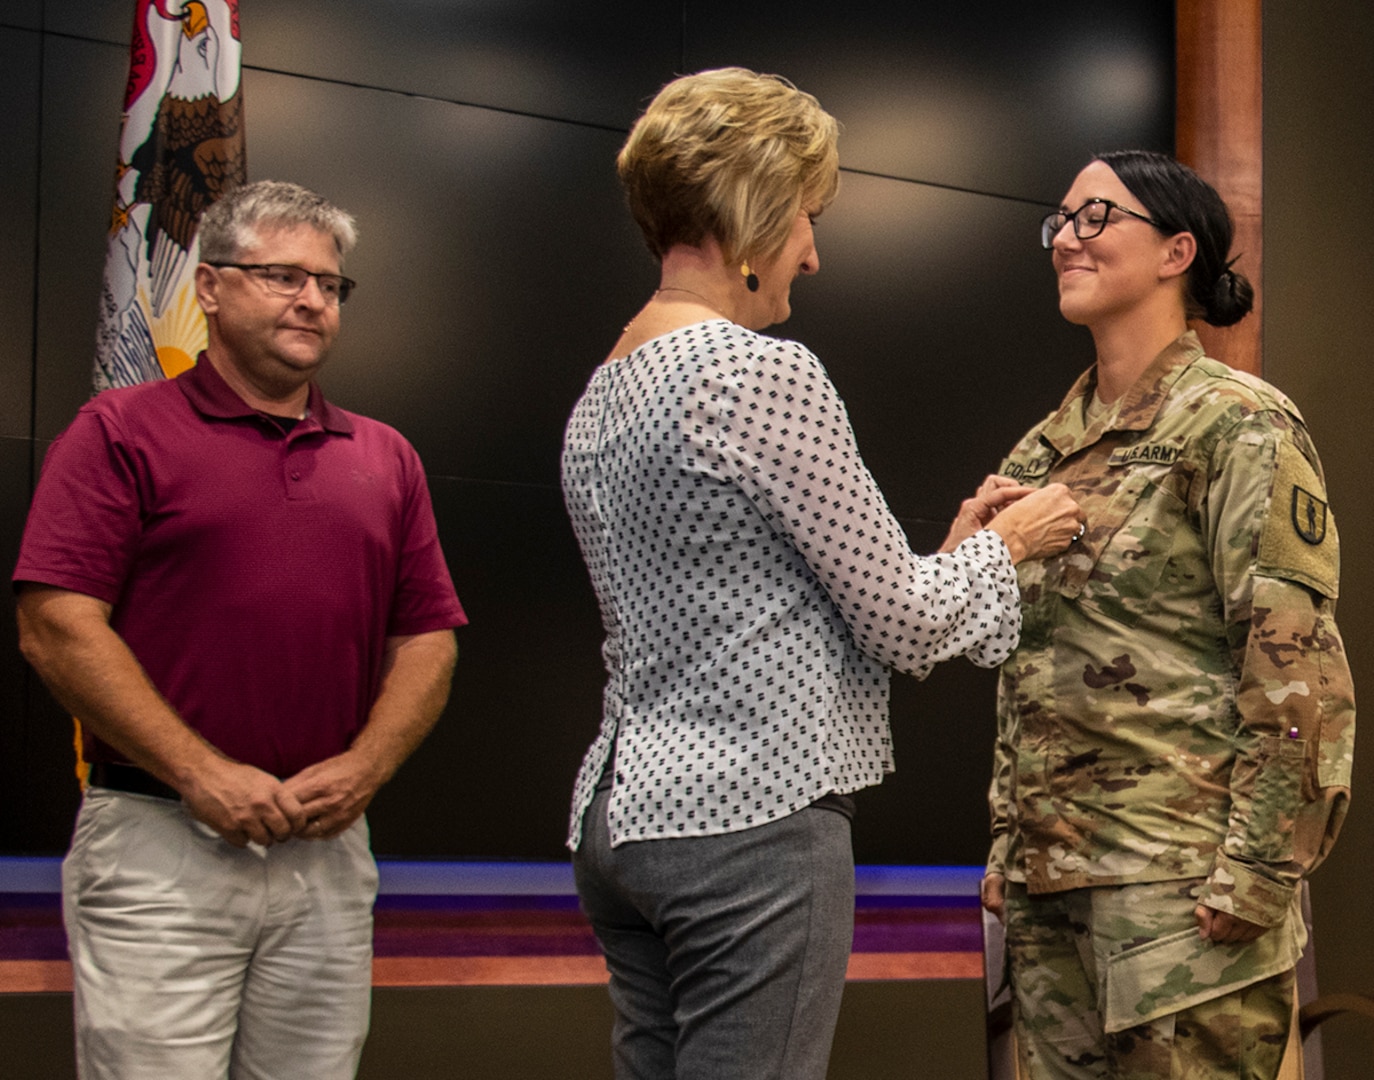 Newly promoted Sgt. 1st Class Erin Connelly’s sister, Candy Jansen, places Connelly’s new rank on her uniform during a promotion ceremony Sept. 4